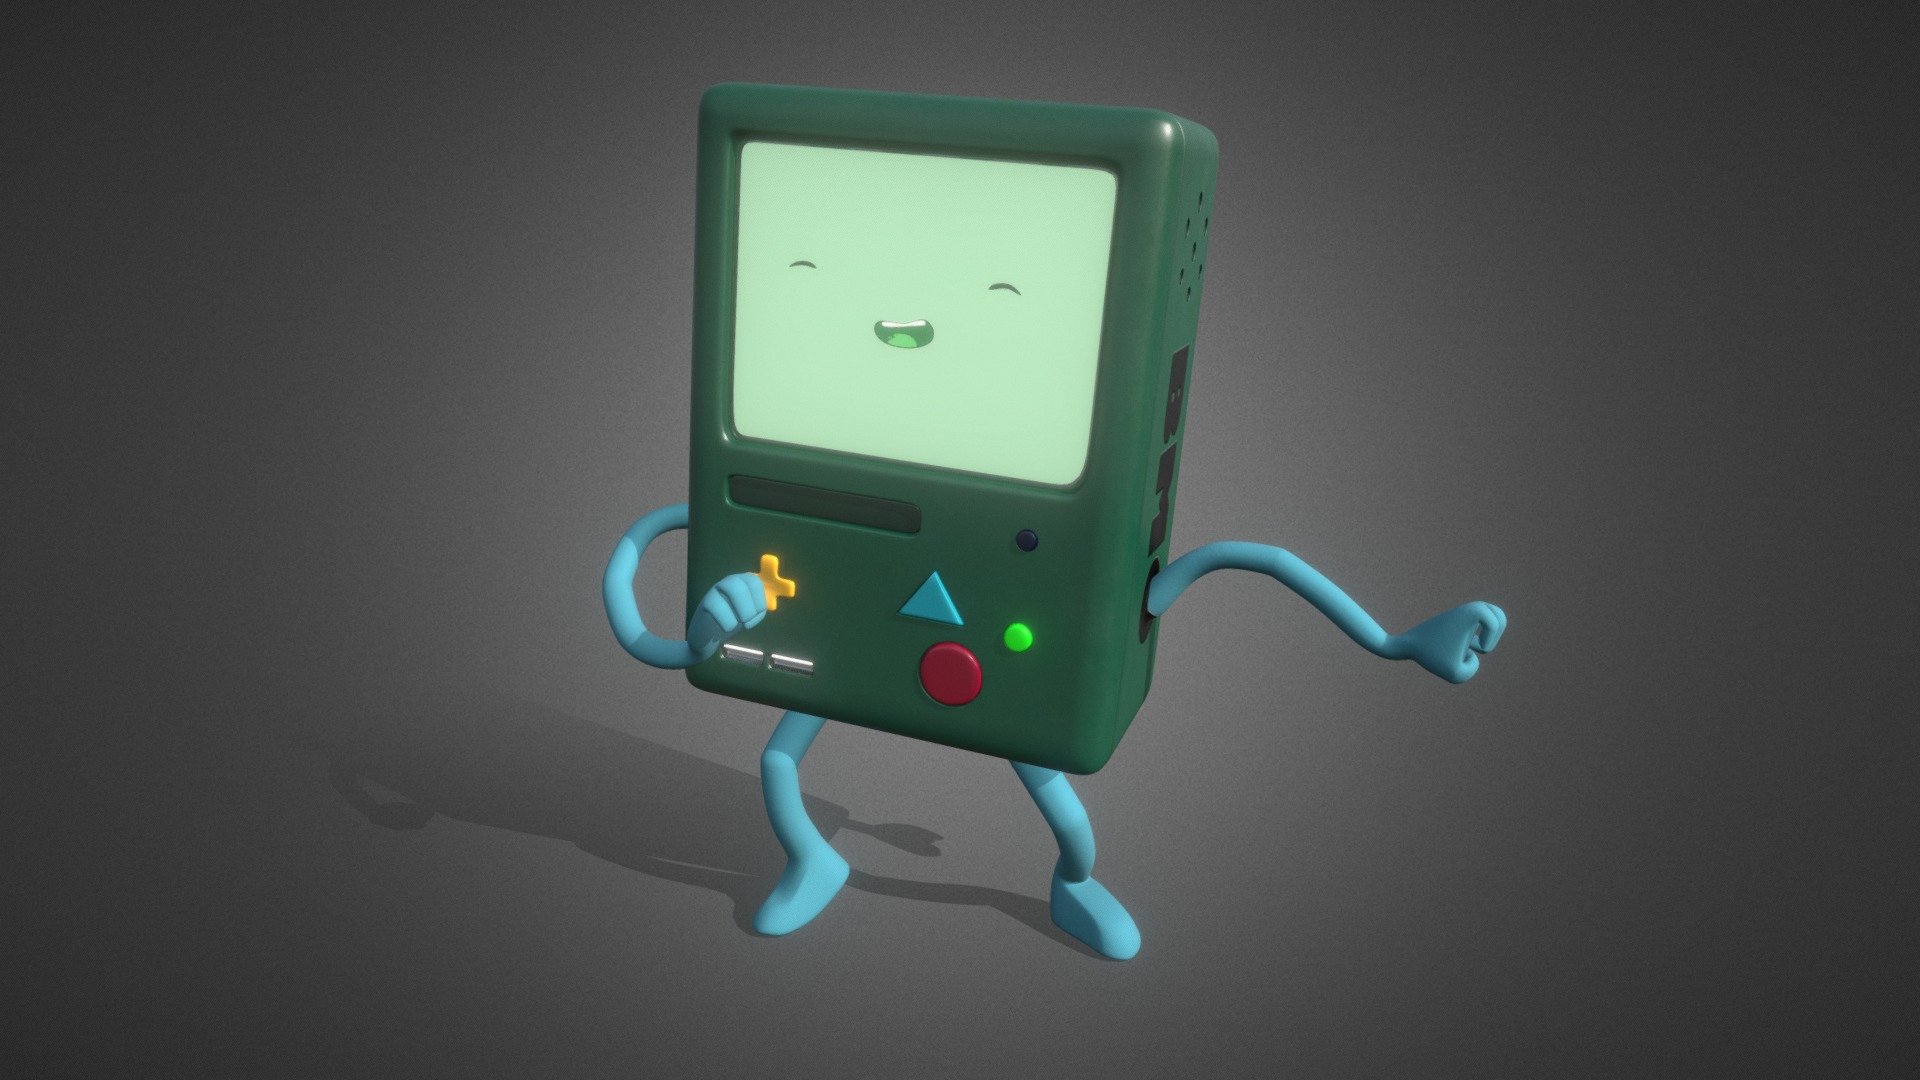 3D model of BMO from adventure time.

Modeled, rigged and animated in Blender 2.8, rendered with eevee, texturized in Substance painter. The arms animation was made with Bbones, since i couldn't make it wok in sketchfab i uploaded the model without the animations. Also, the original face was made with grease pencil, but here is uploaded as mesh, since sketchfab doesn't support it 3d model